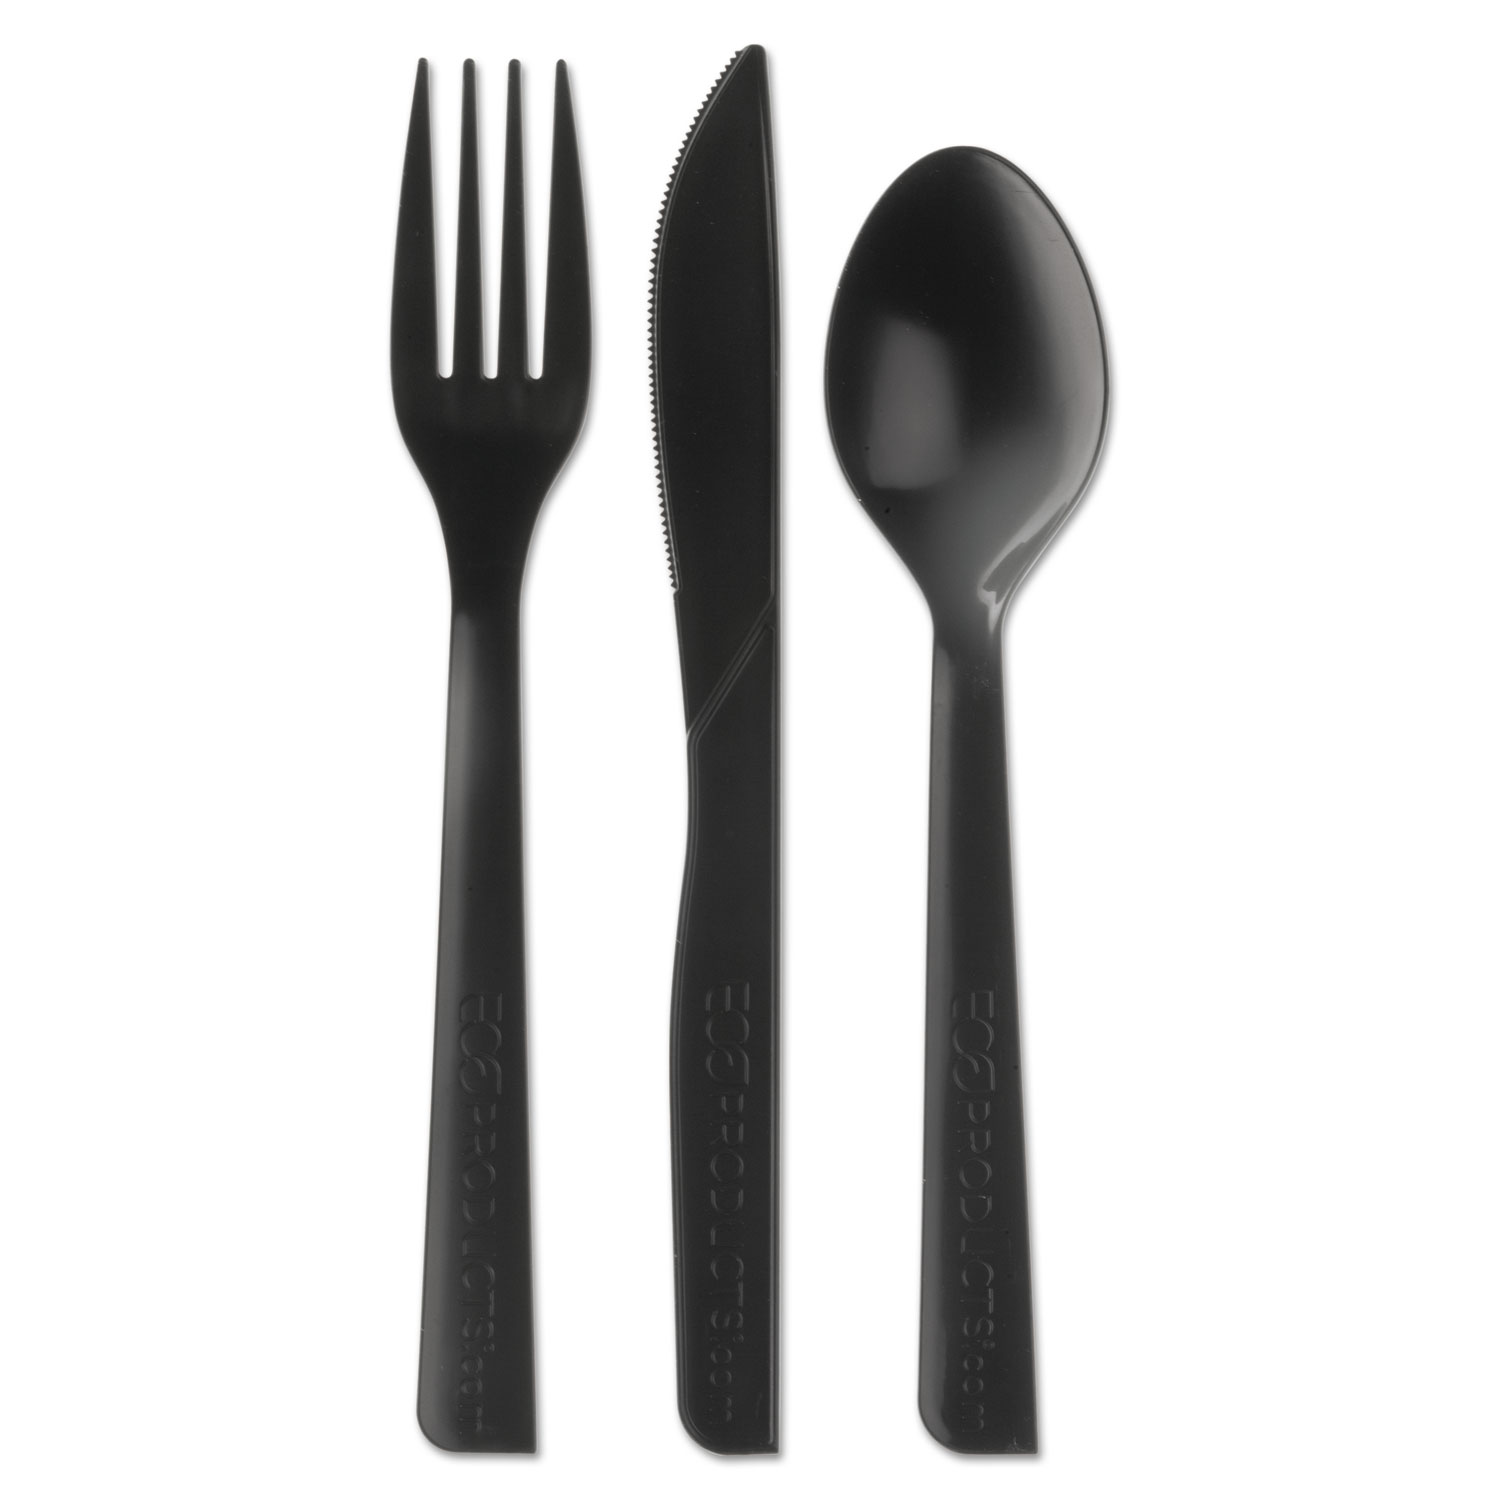  Eco-Products EP-S115 100% Recycled Content Cutlery Kit - 6, 250/Carton (ECOEPS115) 